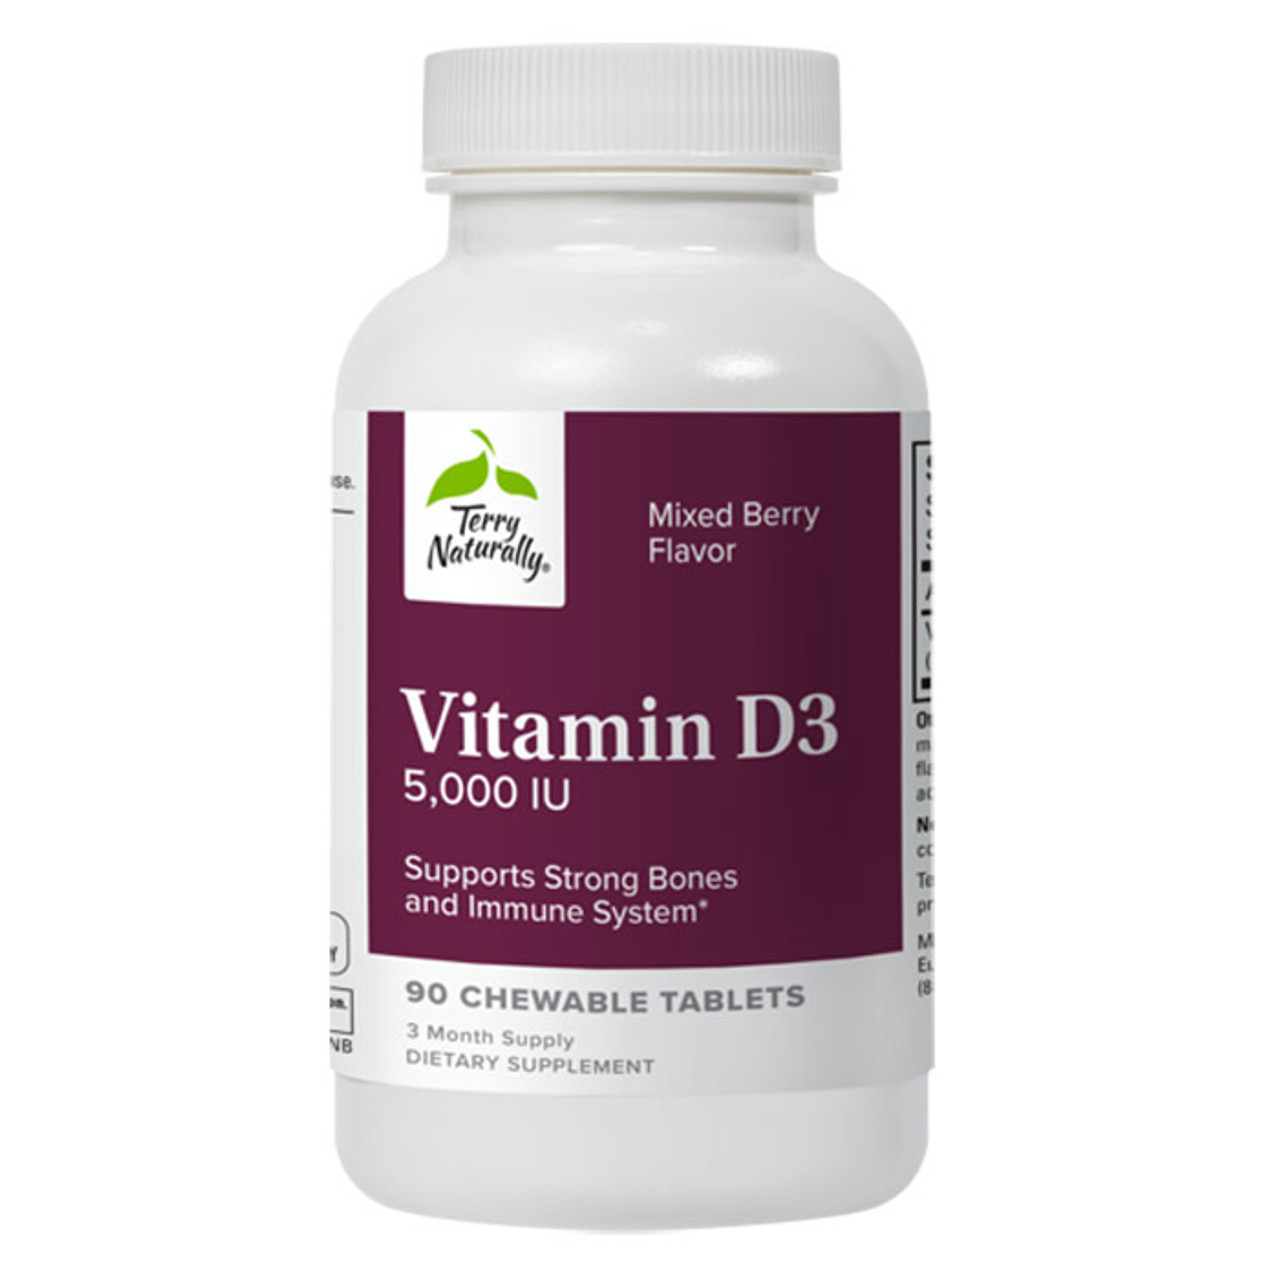 Terry Naturally Vitamin D3 Chewables picture of product box